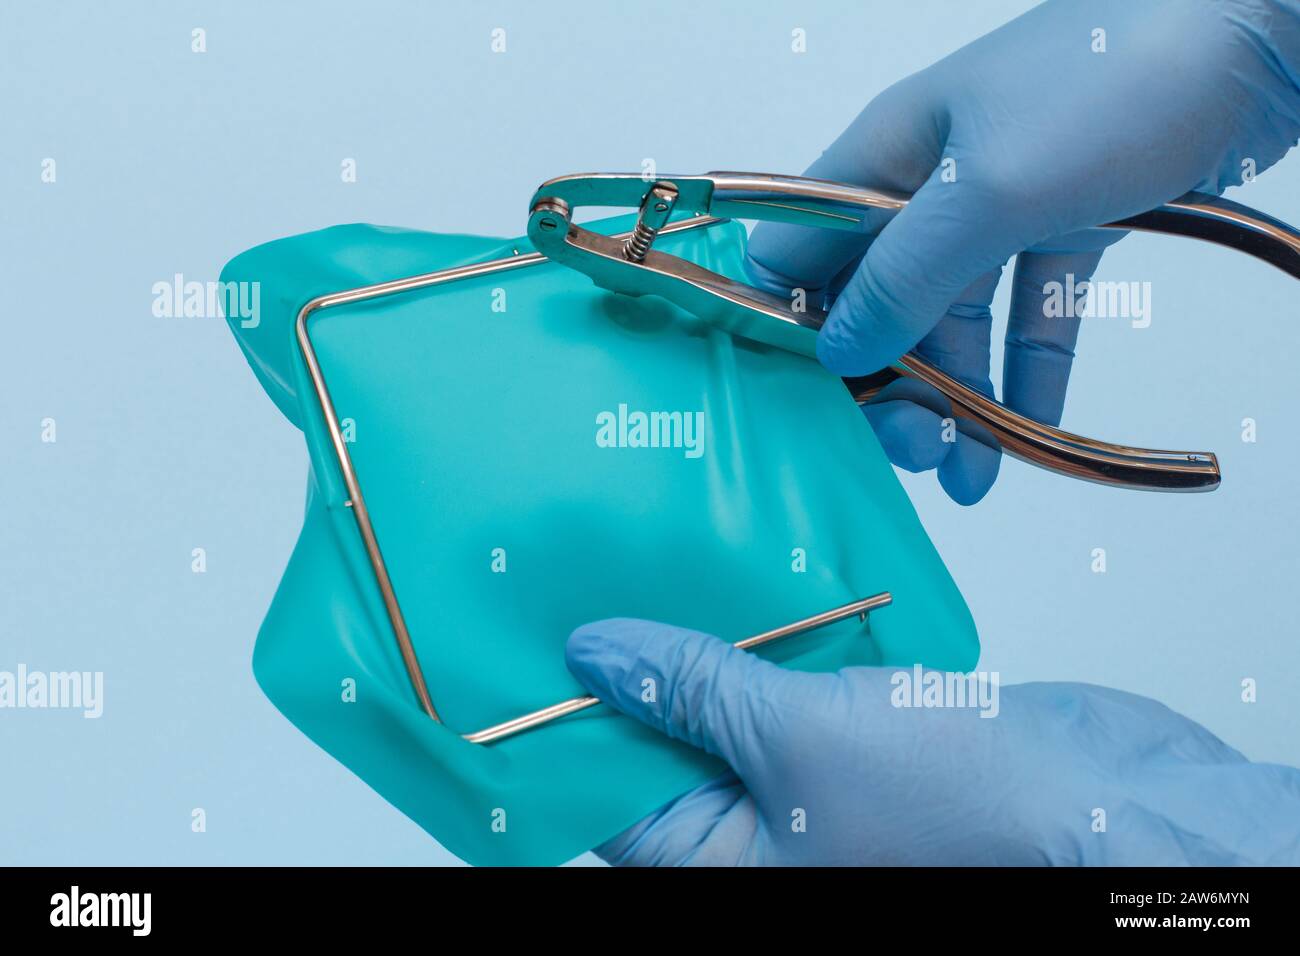 Dentist's hands in a latex gloves with dental punch, cofferdam scarf and frame on blue background. Medical tools concept. Stock Photo